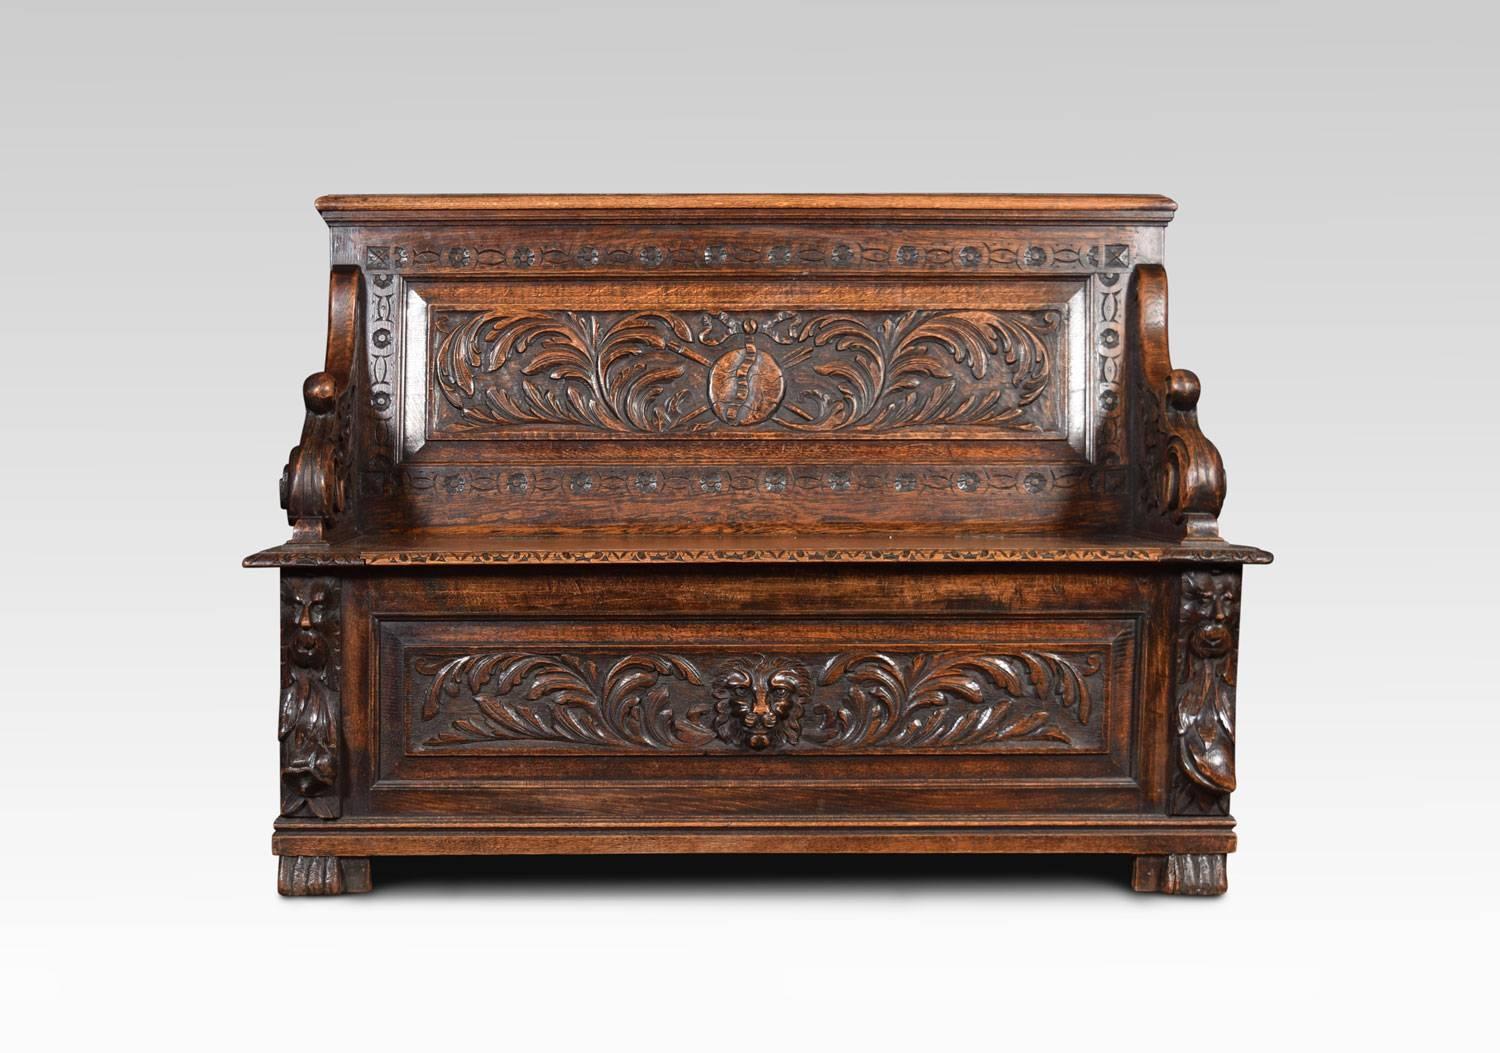 A oak hall settle the carved panelled back with foliated motif and scrolling arm rests. To the lift up seat with panelled base below having lion mask decoration raised up on paw feet.
Dimensions
Height 35.5 Inches Height to Seat 17 Inches
Width 49.5